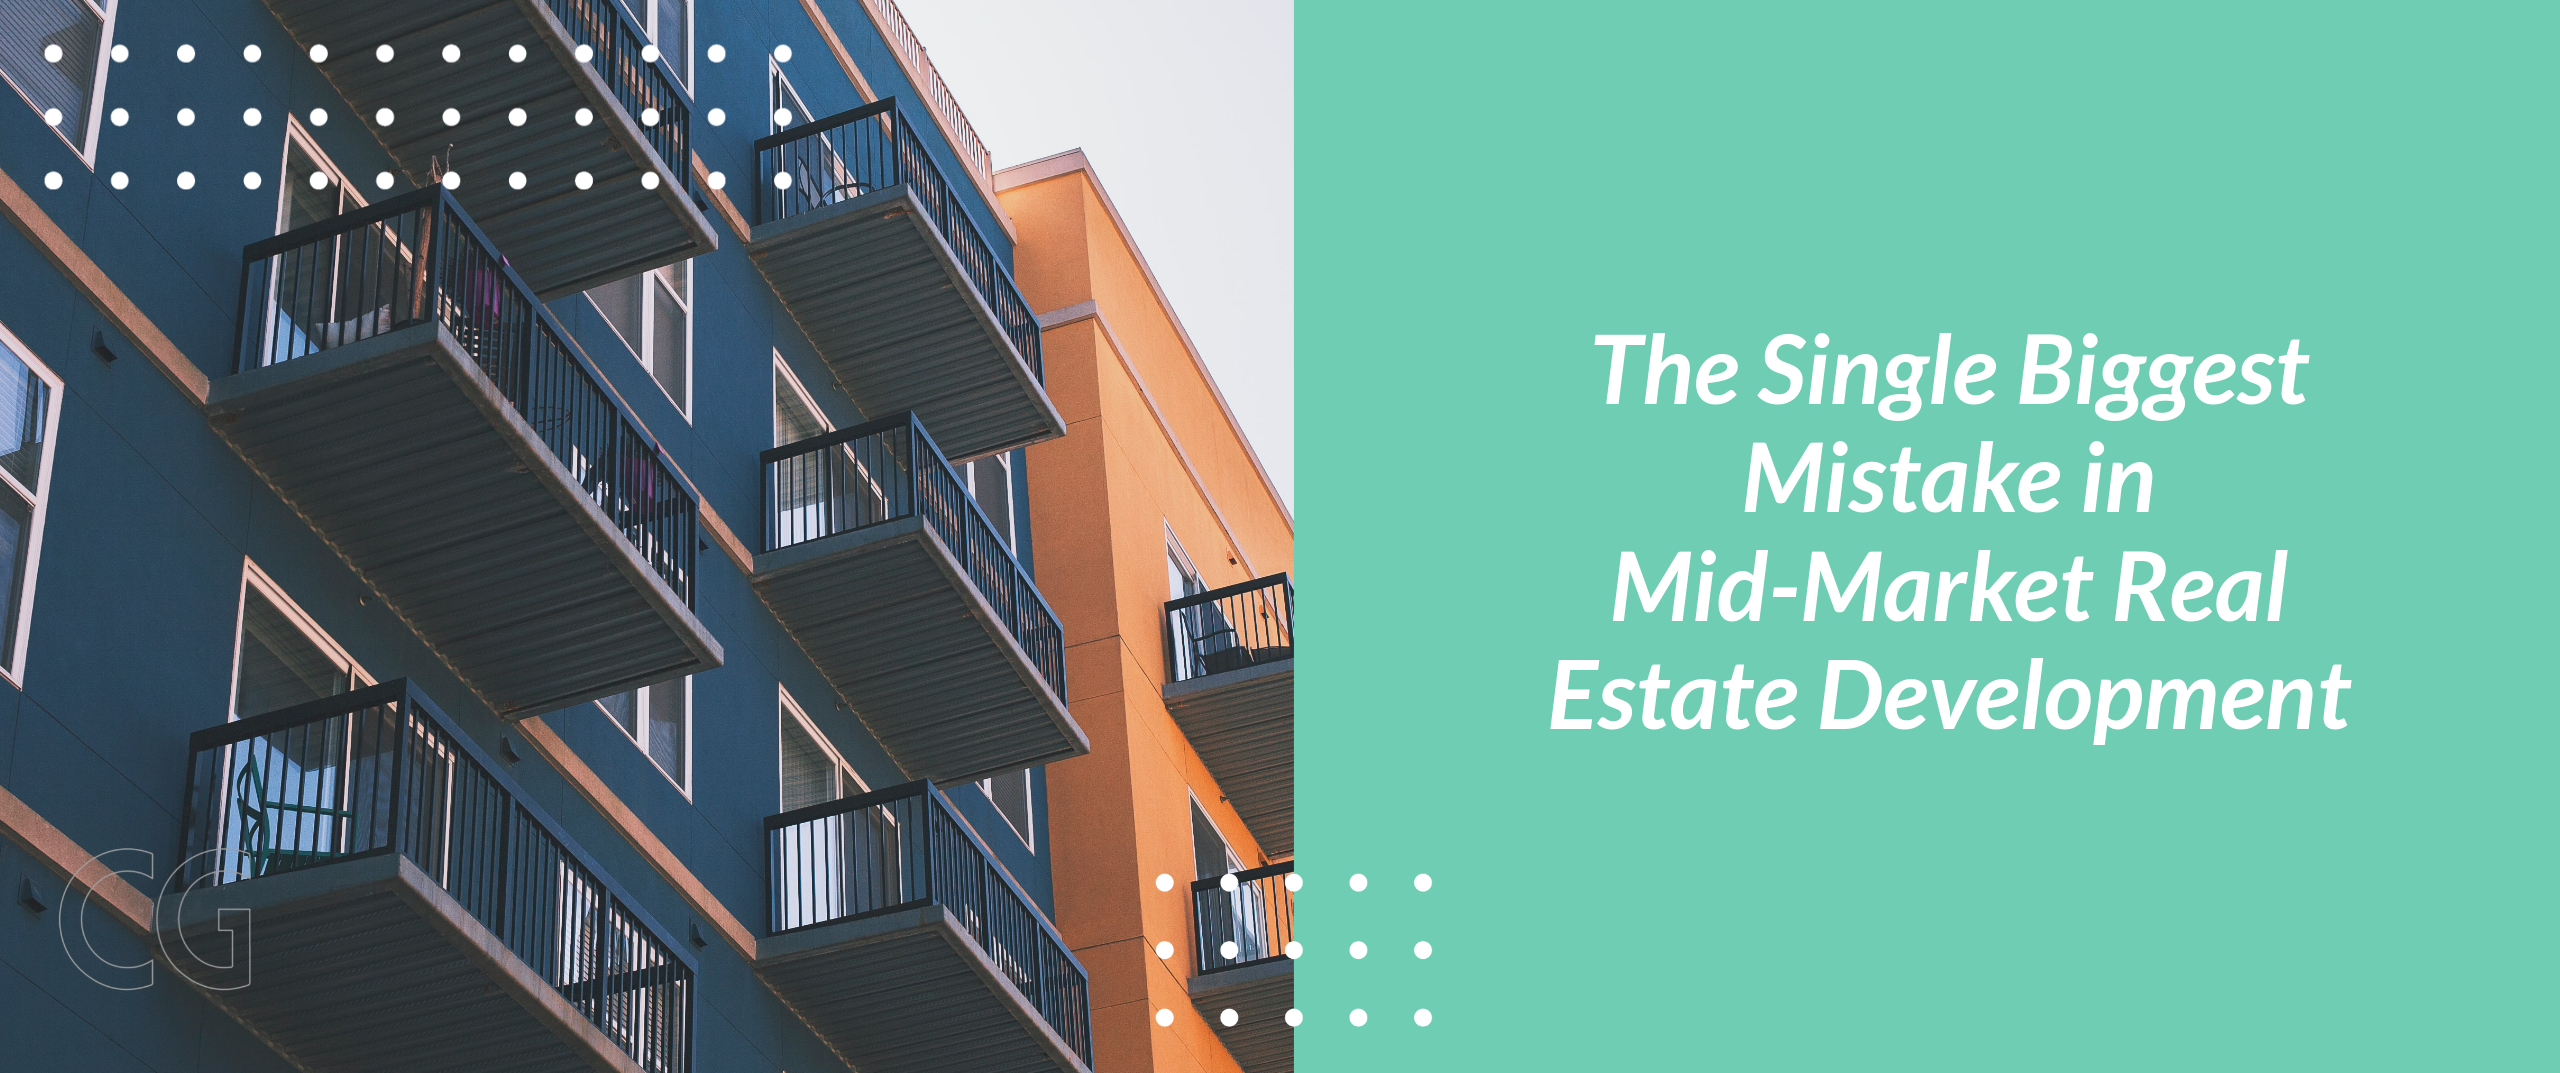 The Single Biggest Mistake in Mid-Market Real Estate Development